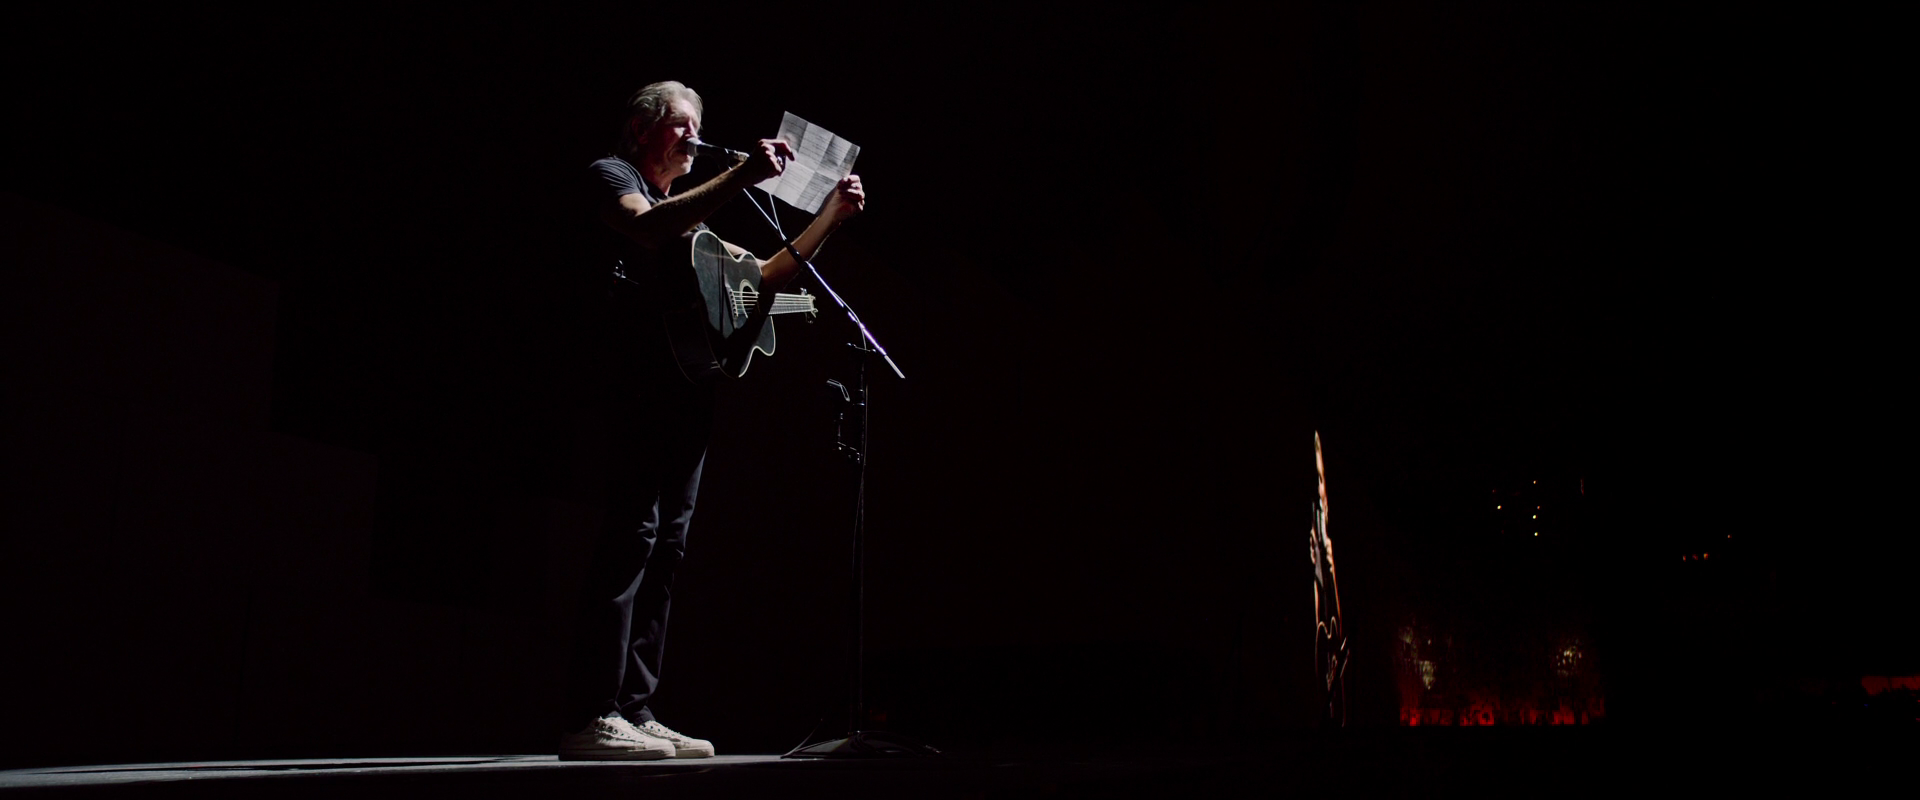 ǽ Roger.Waters.the.Wall.2014.1080p.BluRay.x264.DTS-WiKi 11.12GB-6.png